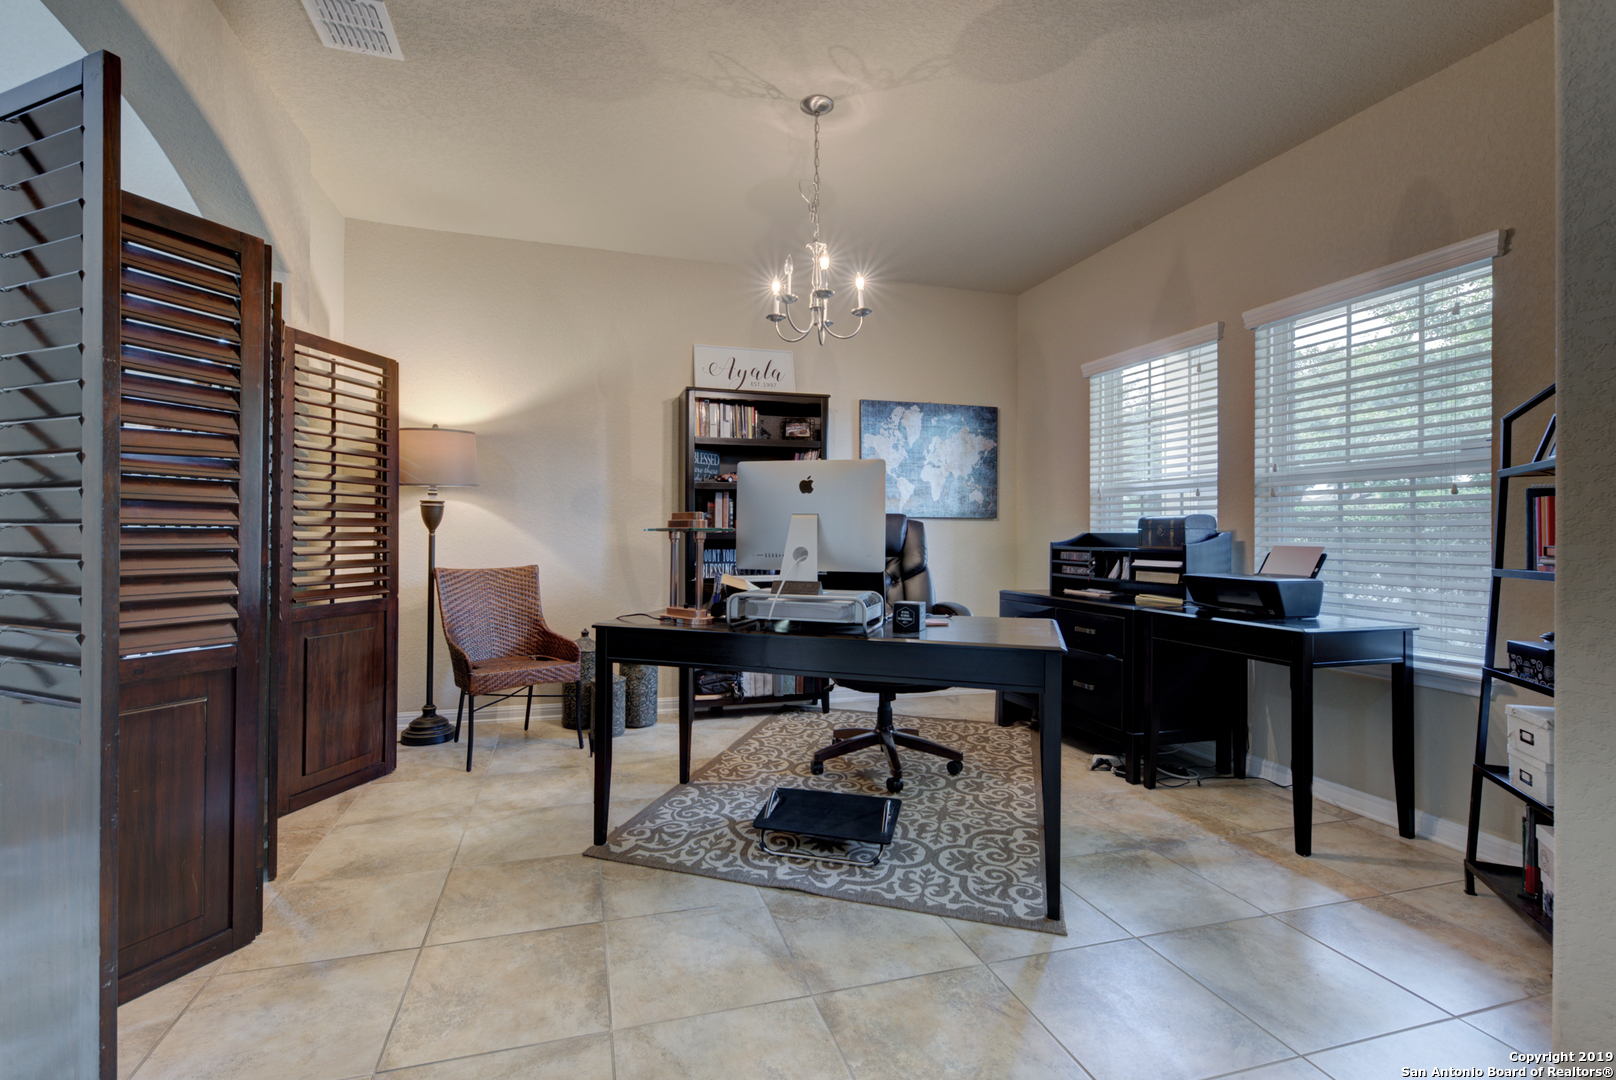 If you have additional questions regarding 5326 GINGER RISE  in San Antonio or would like to tour the property with us call 800-660-1022 and reference MLS# 1741430.